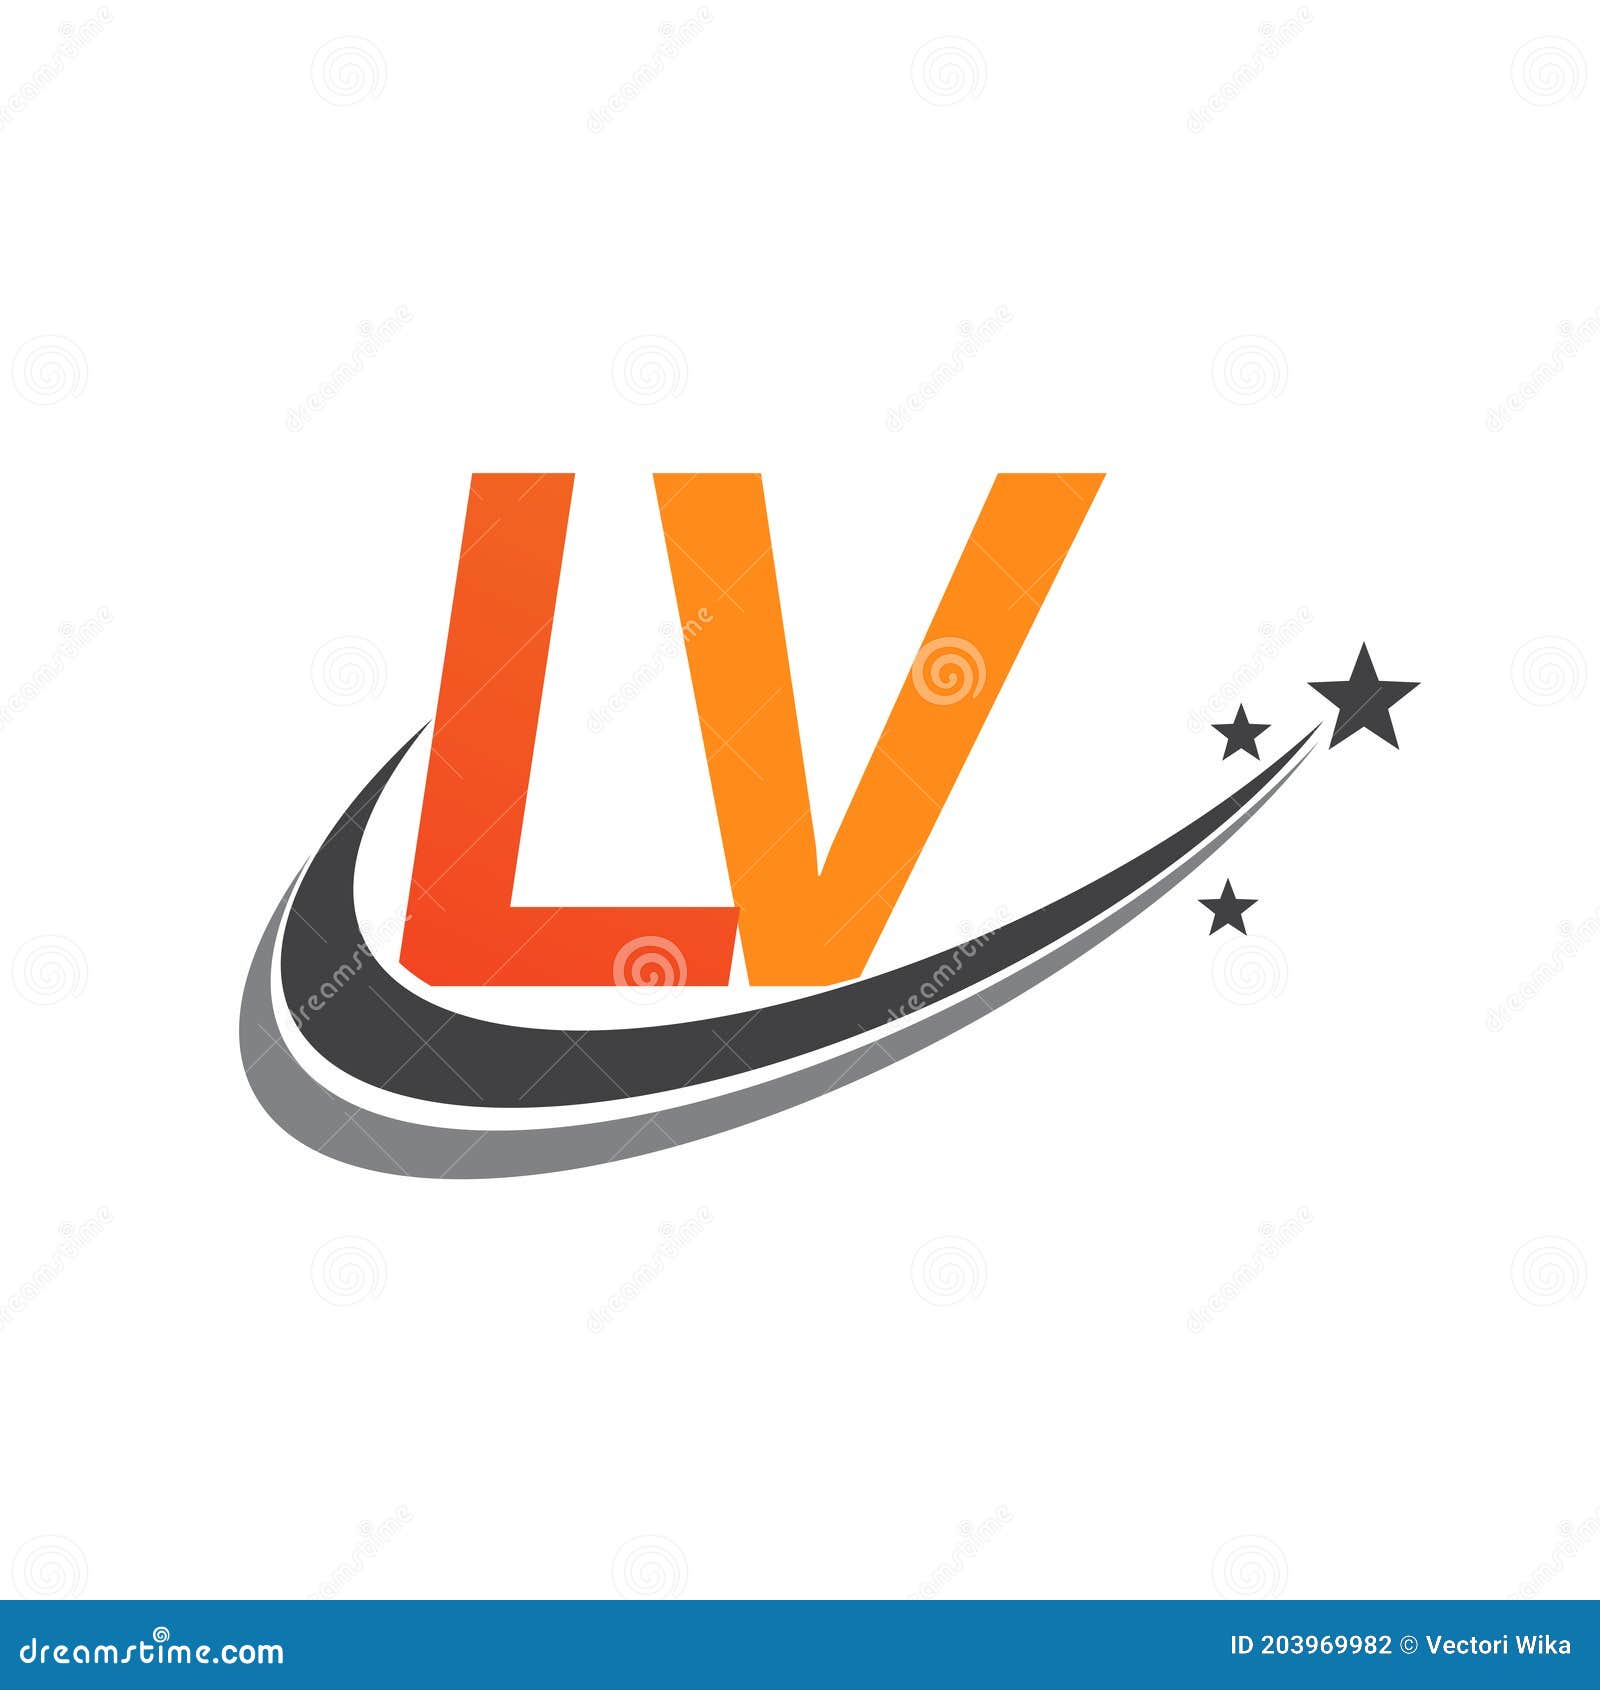 Initial Letter LV Logotype Company Name Colored Orange and Grey Swoosh Star  Design. Vector Logo for Business and Company Identity Stock Vector -  Illustration of finance, banking: 203969982